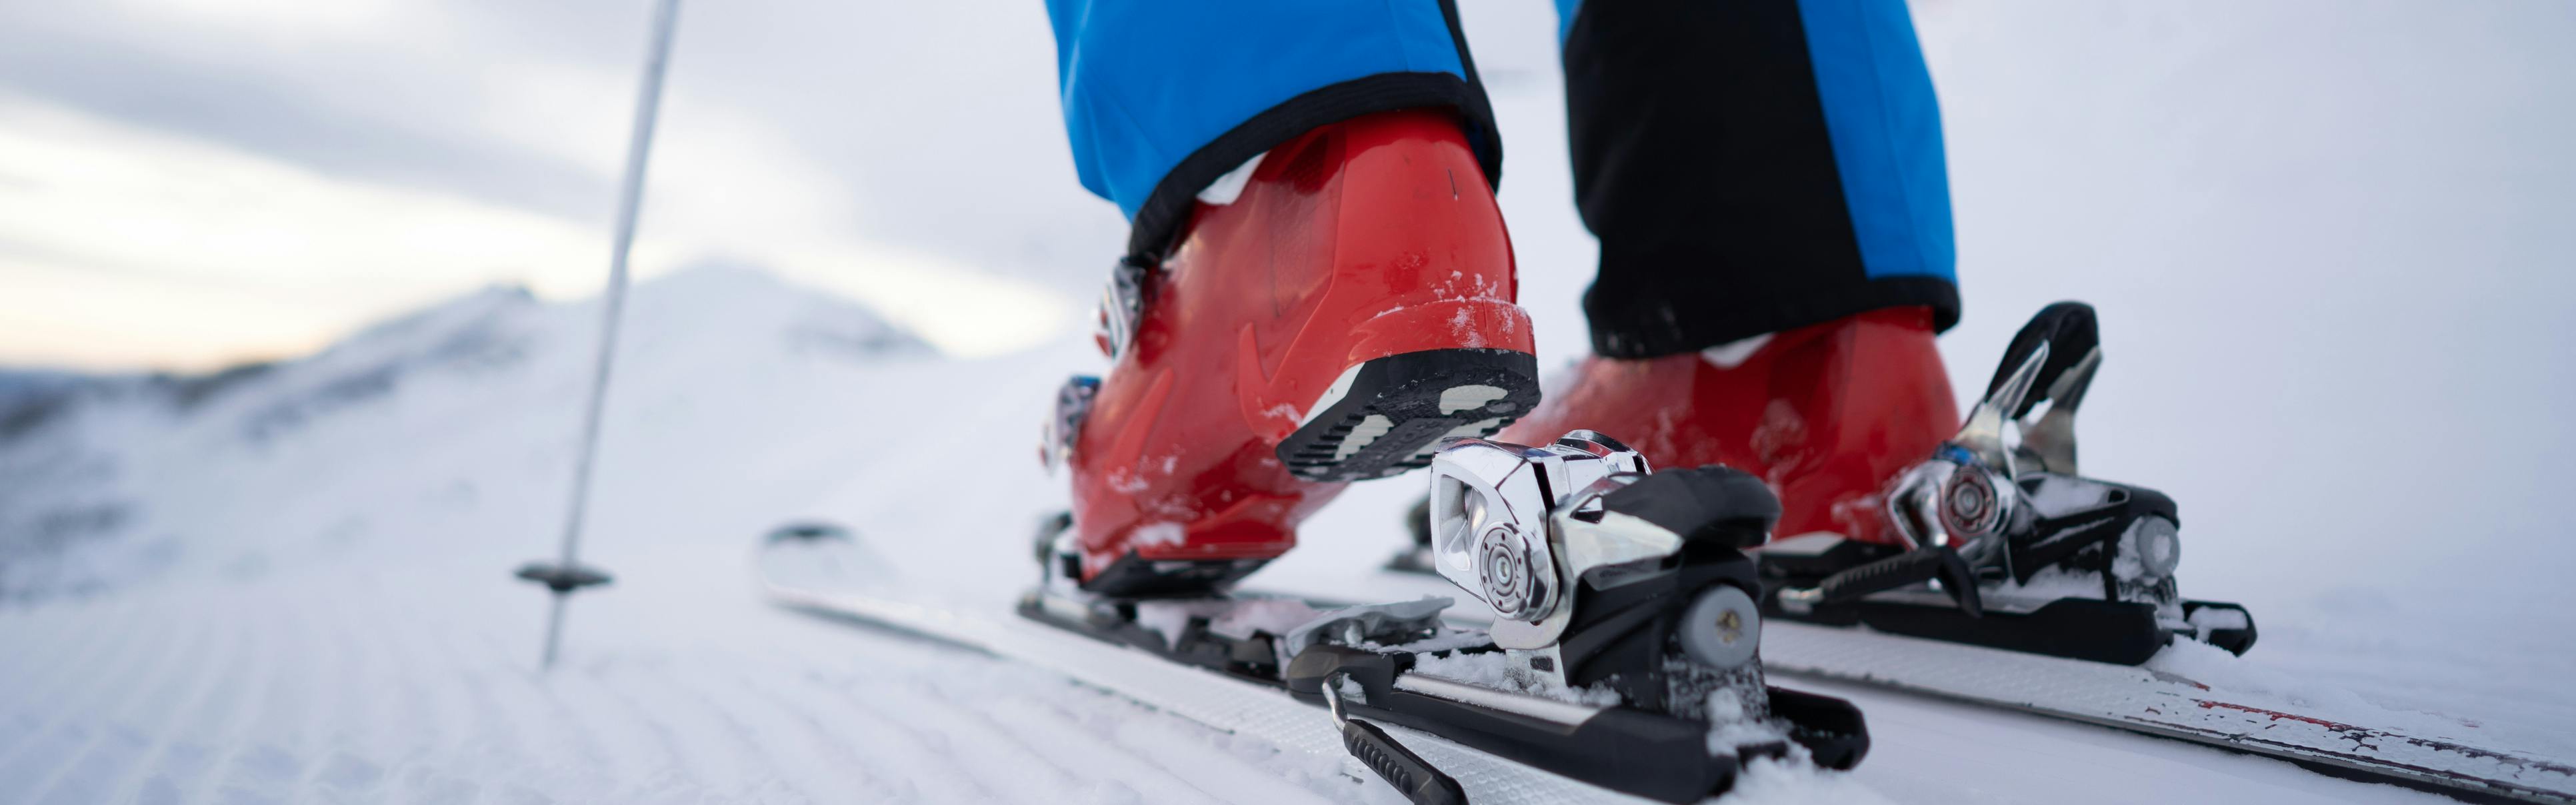 Ski Boot Size Guide: How To Buy Properly-Fitting Ski Boots | Curated.Com